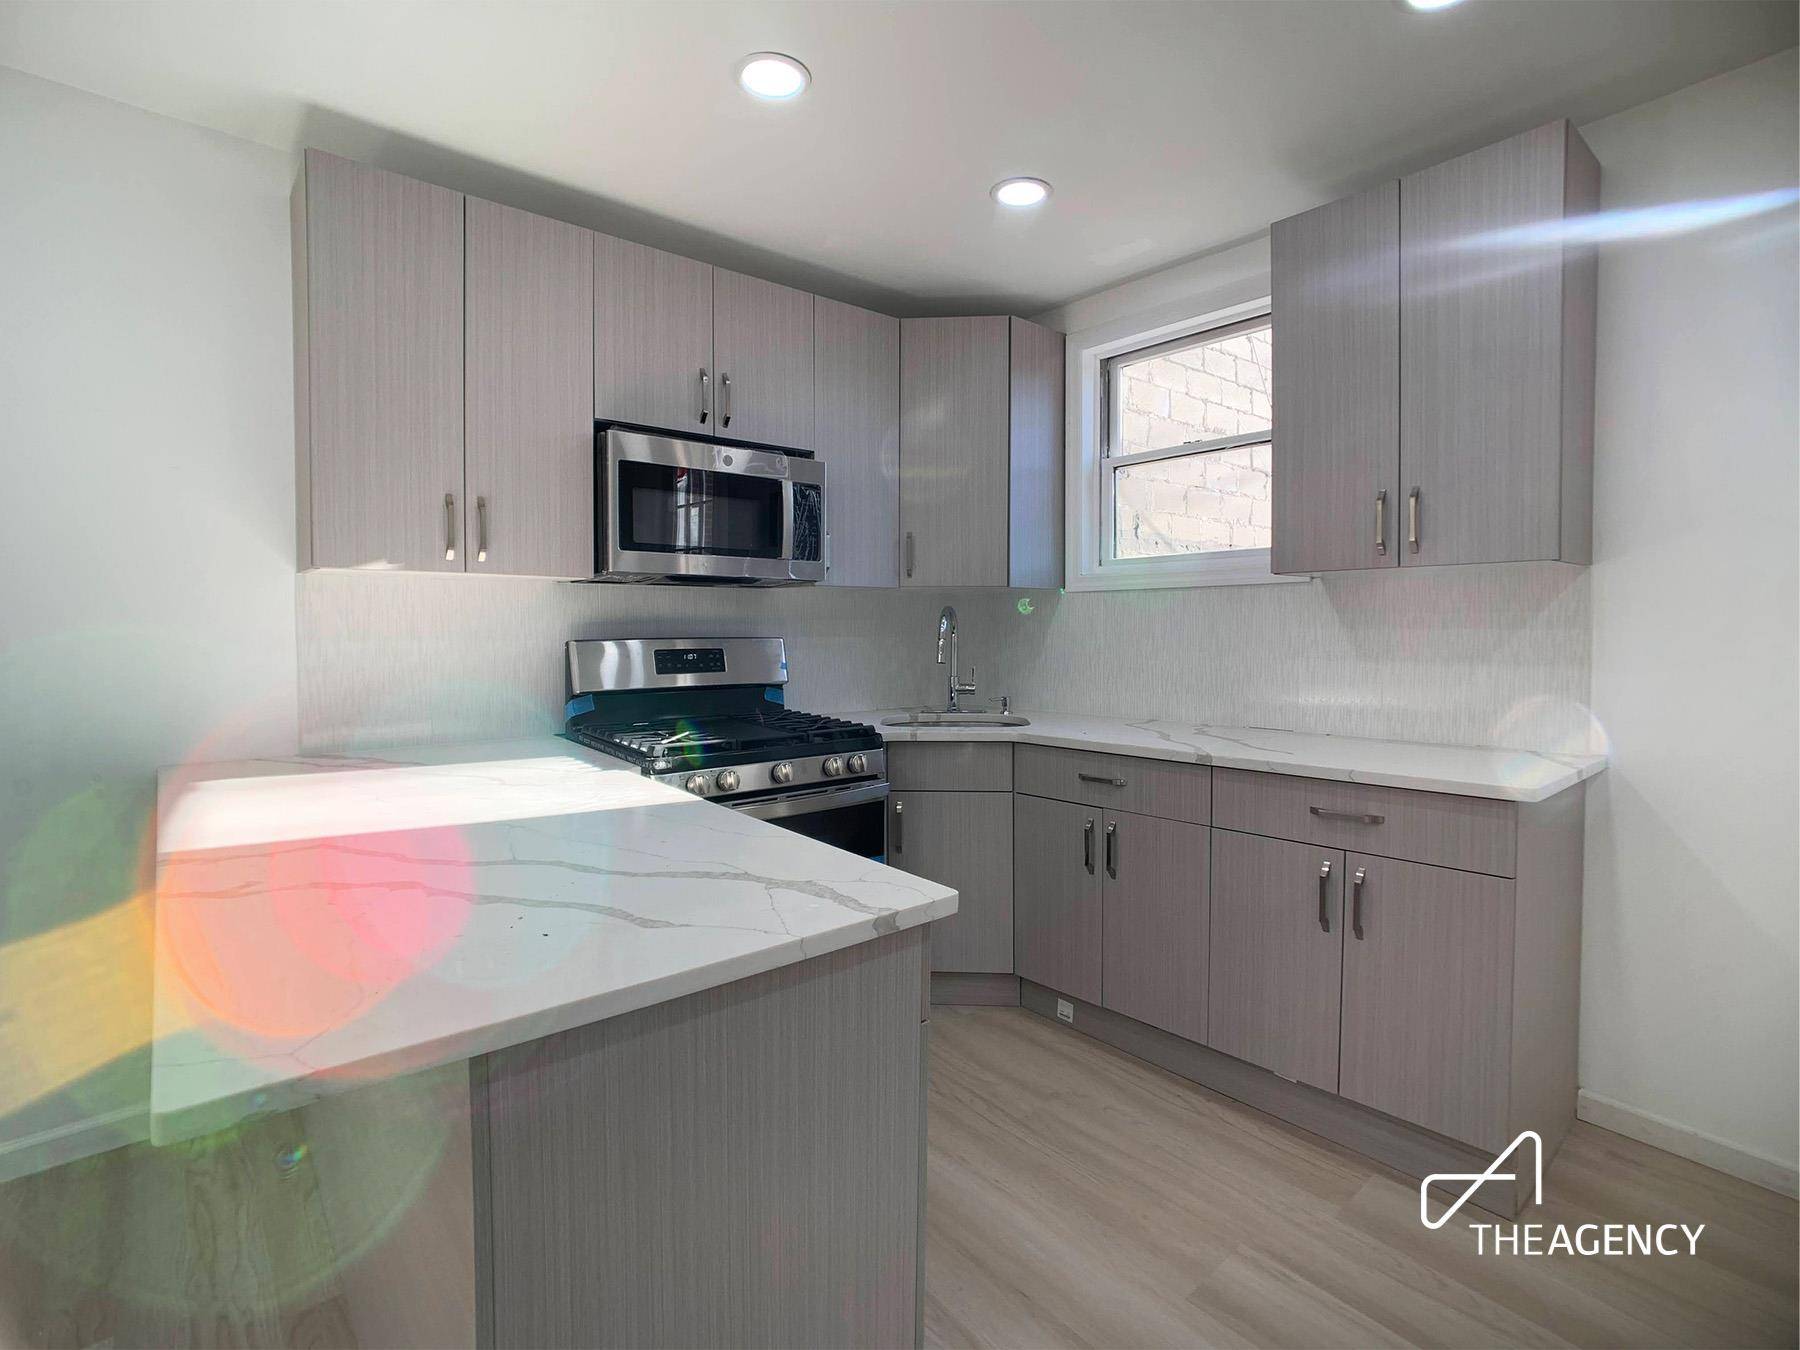 Welcome to 222 22nd St where Unit 2 is a renovated 2 bedroom 2BR 1 bathroom 1BA with a huge private outdoor space that's going to make 2 your lucky ...